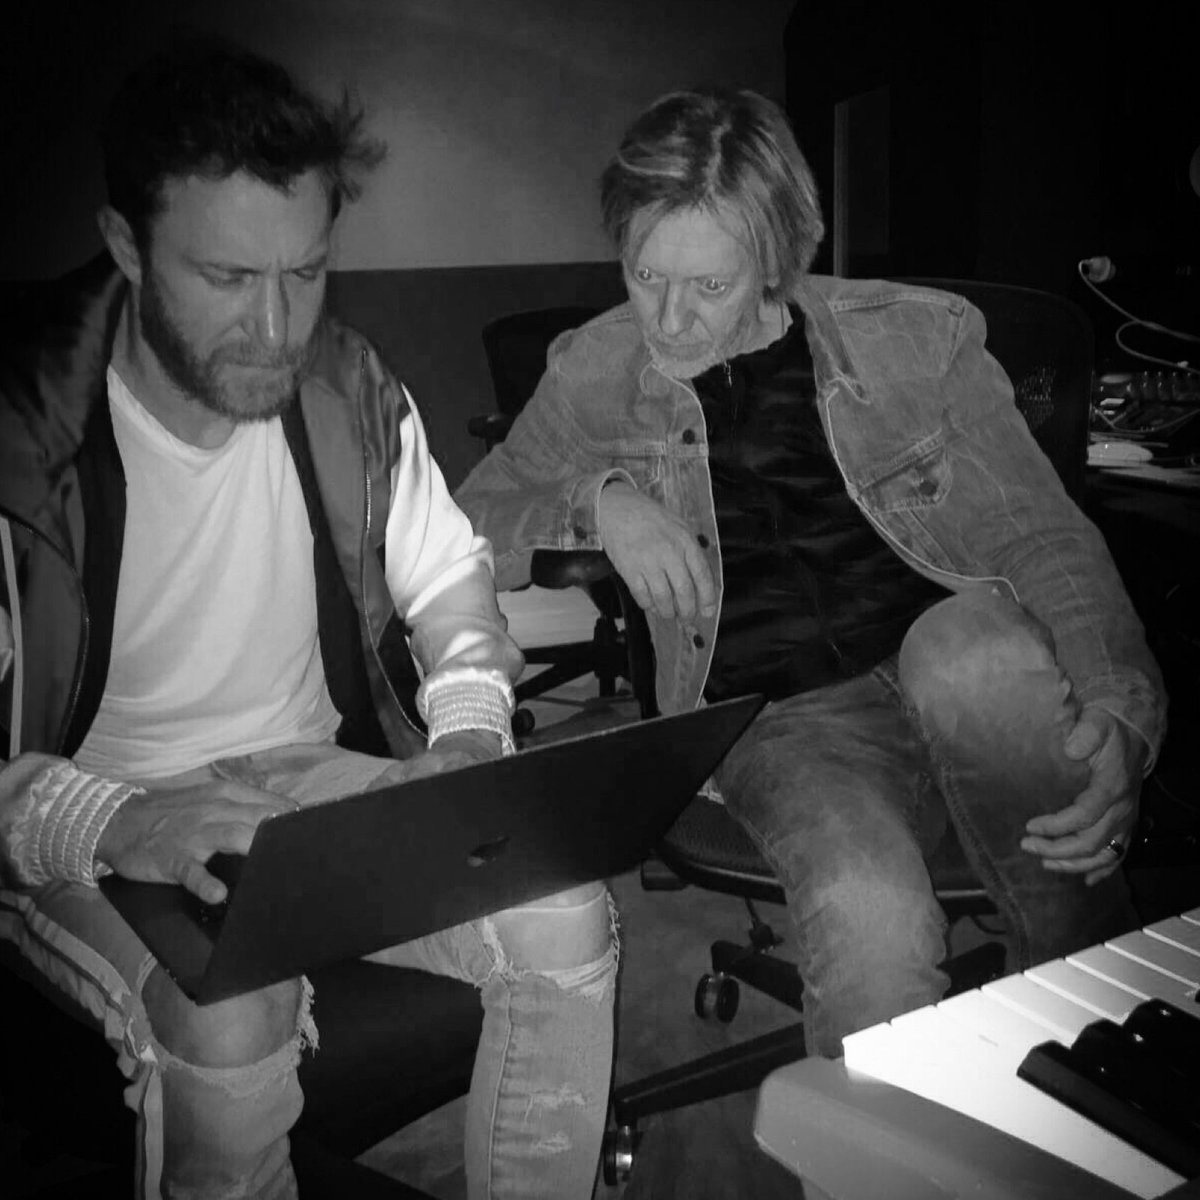 RT @Fred_RISTER: #Studio session Los Angeles with @davidguetta... #Music is #therapy @LACity https://t.co/1QgLiHtNJi